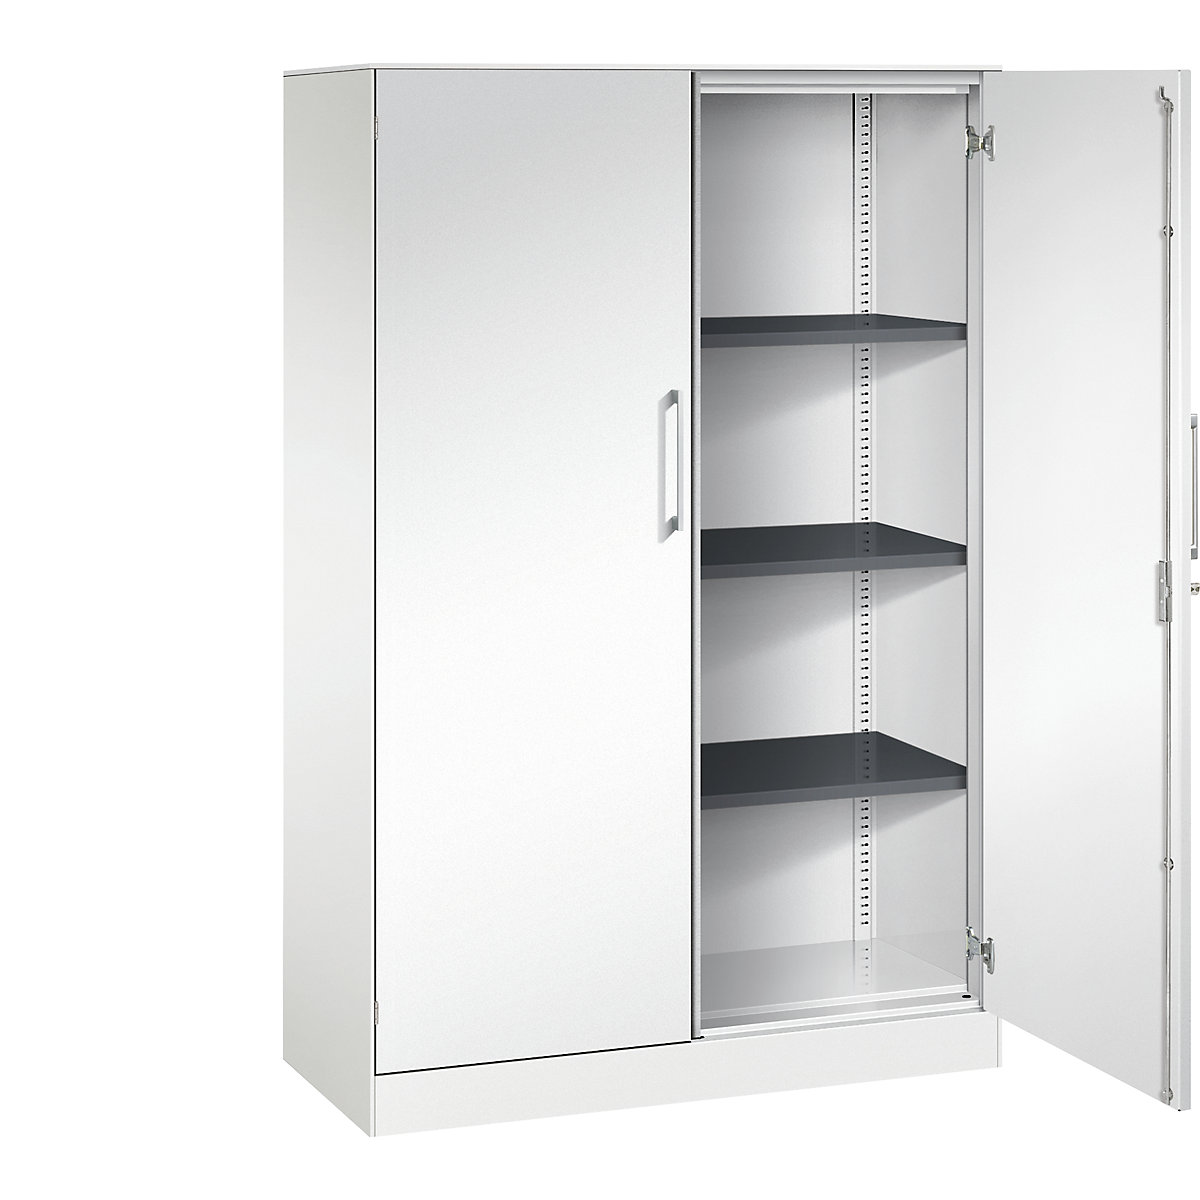 ASISTO double door cupboard, height 1617 mm – C+P, width 1000 mm, 3 shelves, traffic white/traffic white-11